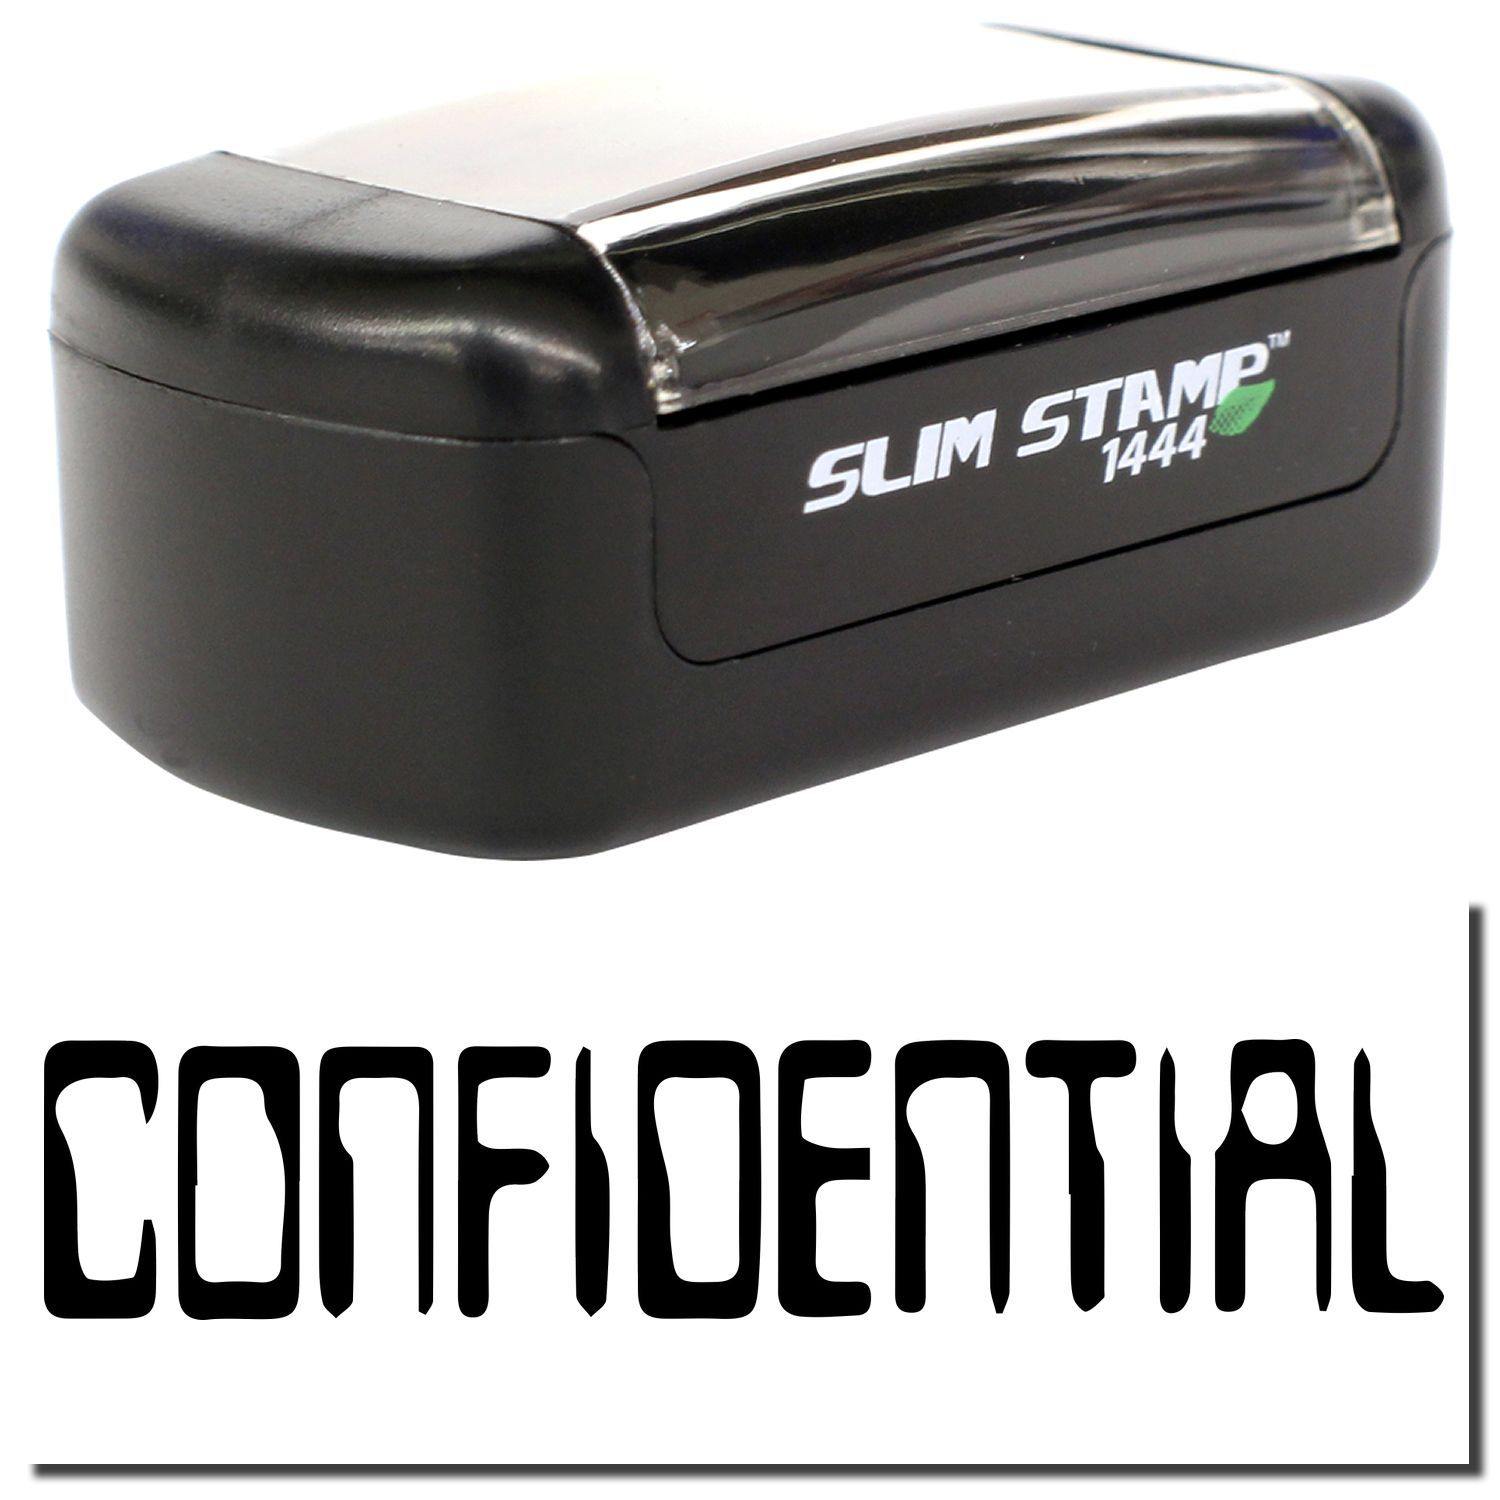 A stock office pre-inked stamp with a stamped image showing how the text "CONFIDENTIAL" in a barcode font is displayed after stamping.